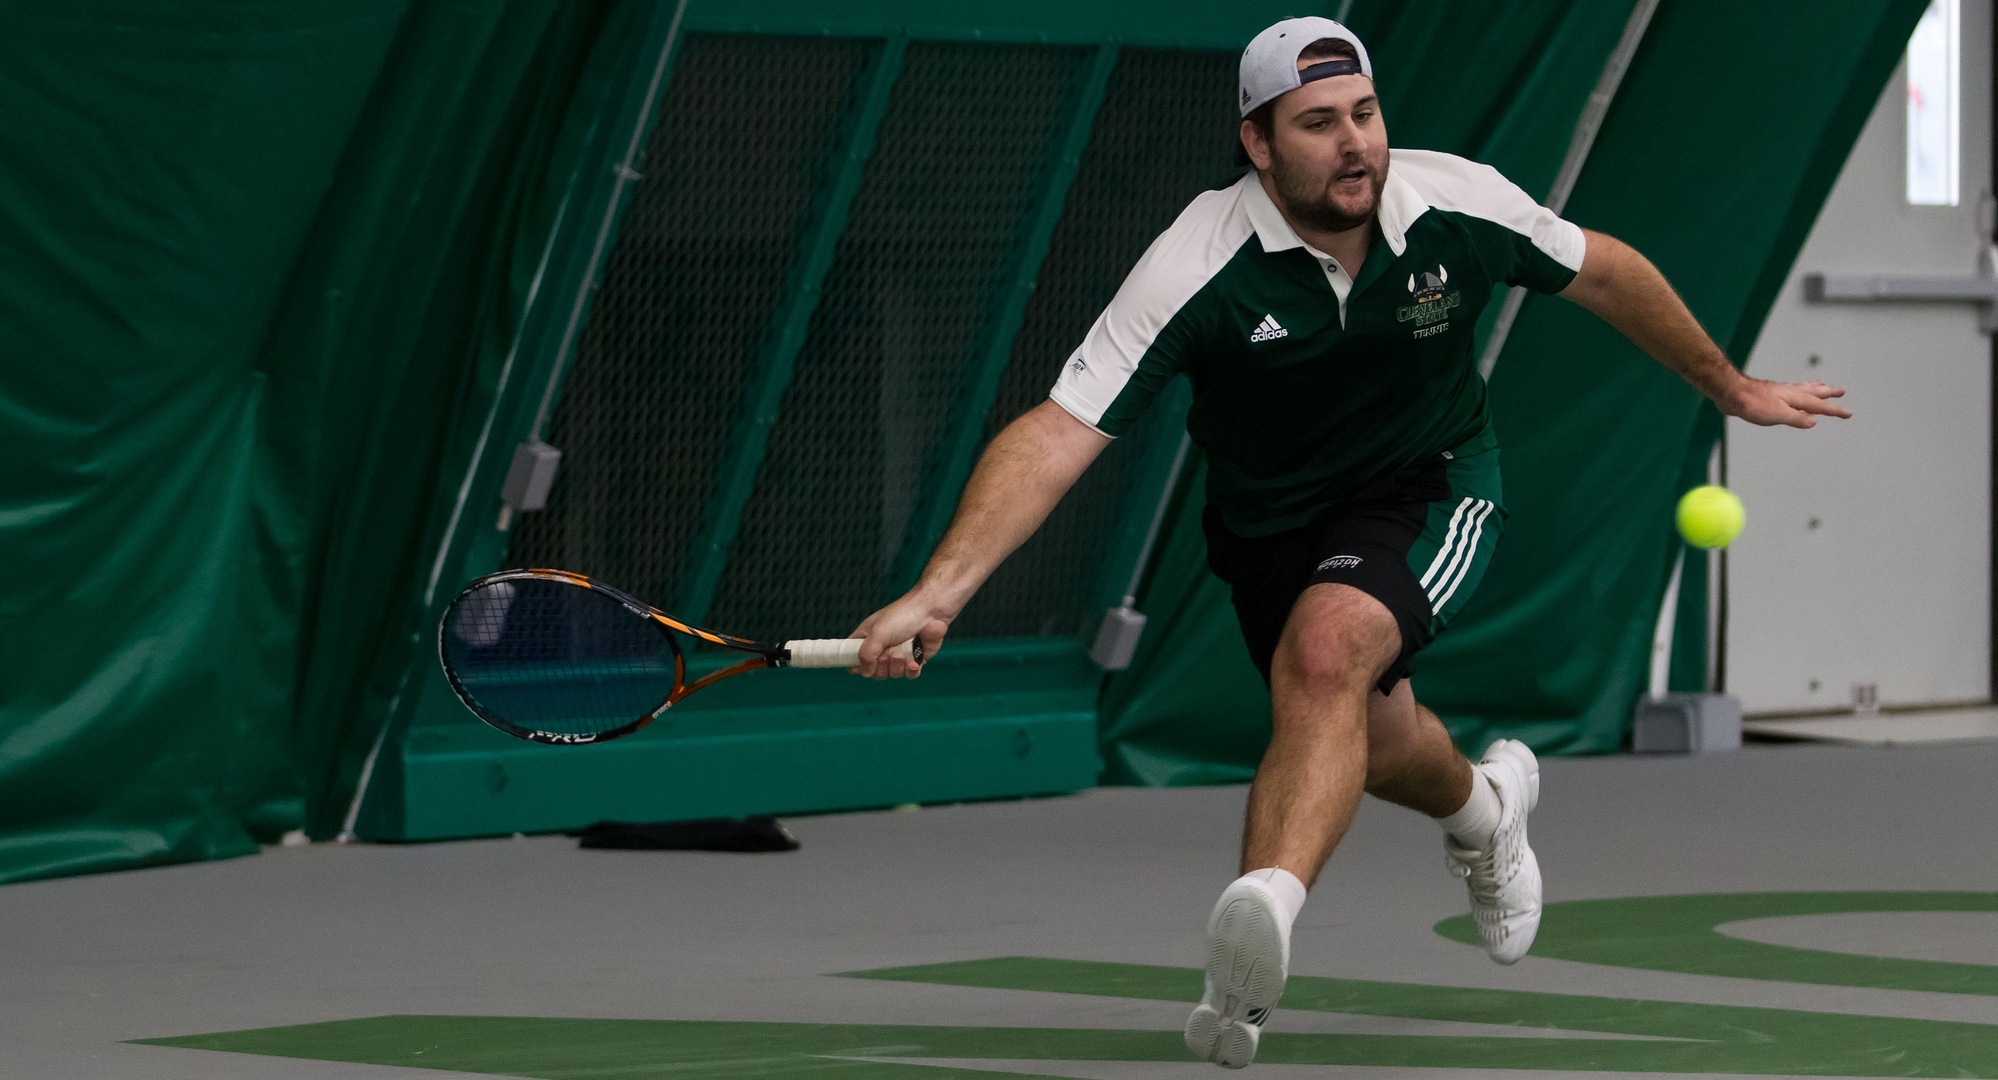 Terry & Radosevic Named #HLMTEN Doubles Team Of The Week